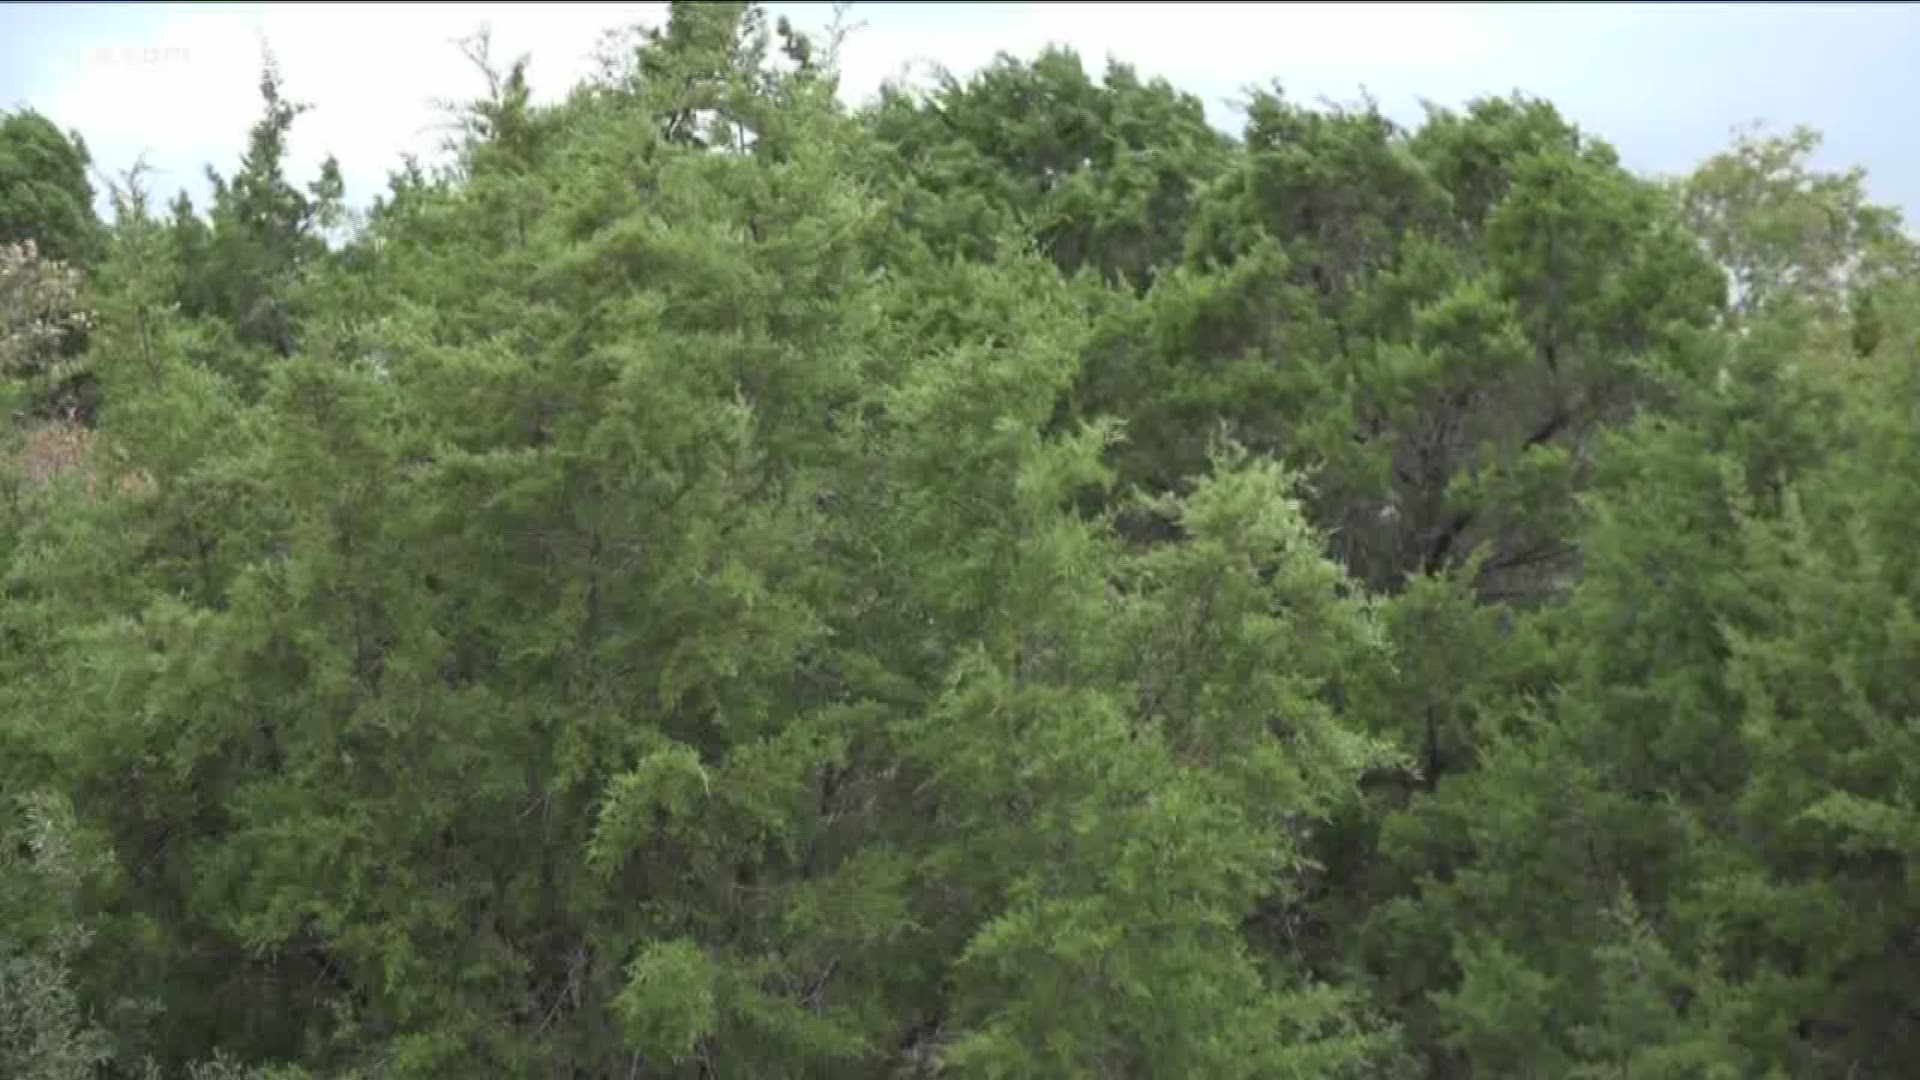 Winter allergies are coming, and this cold weather could make cedar season even worse.